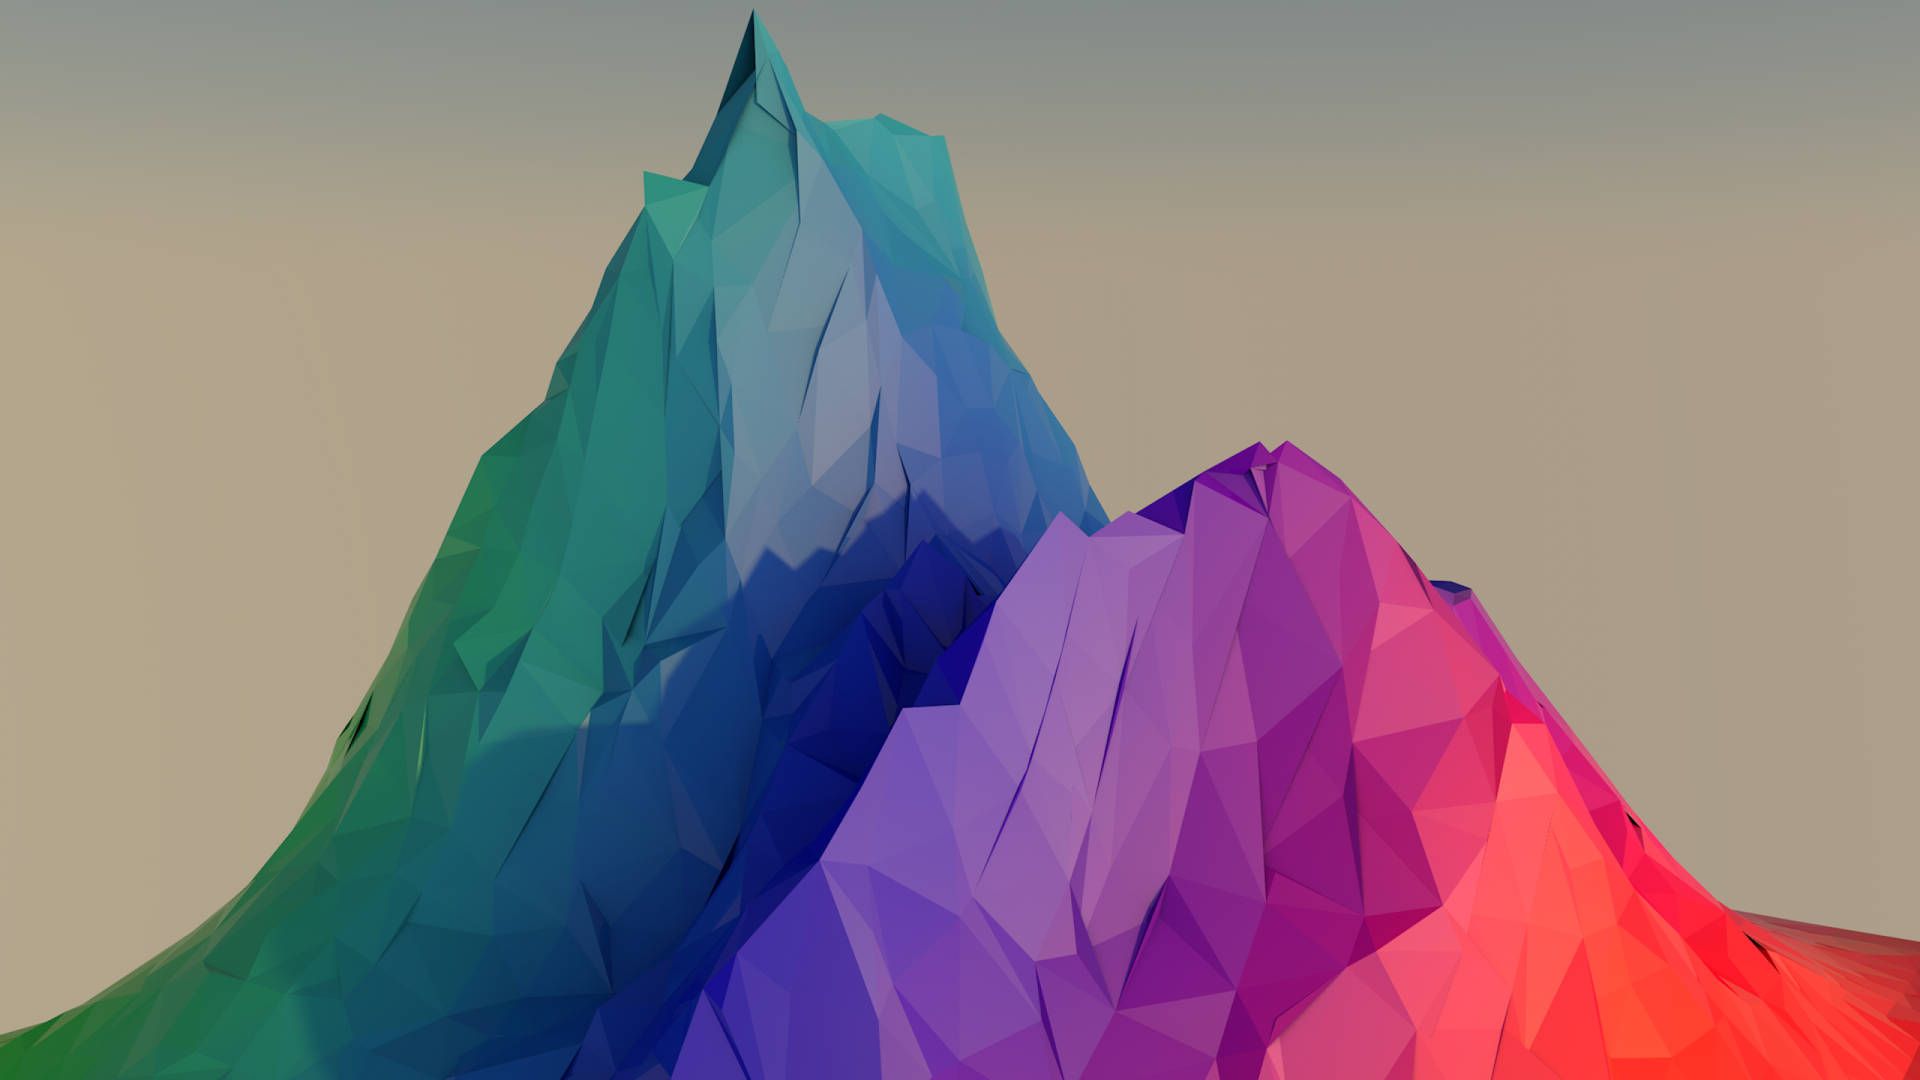 A colorful mountain with some trees on it - Low poly